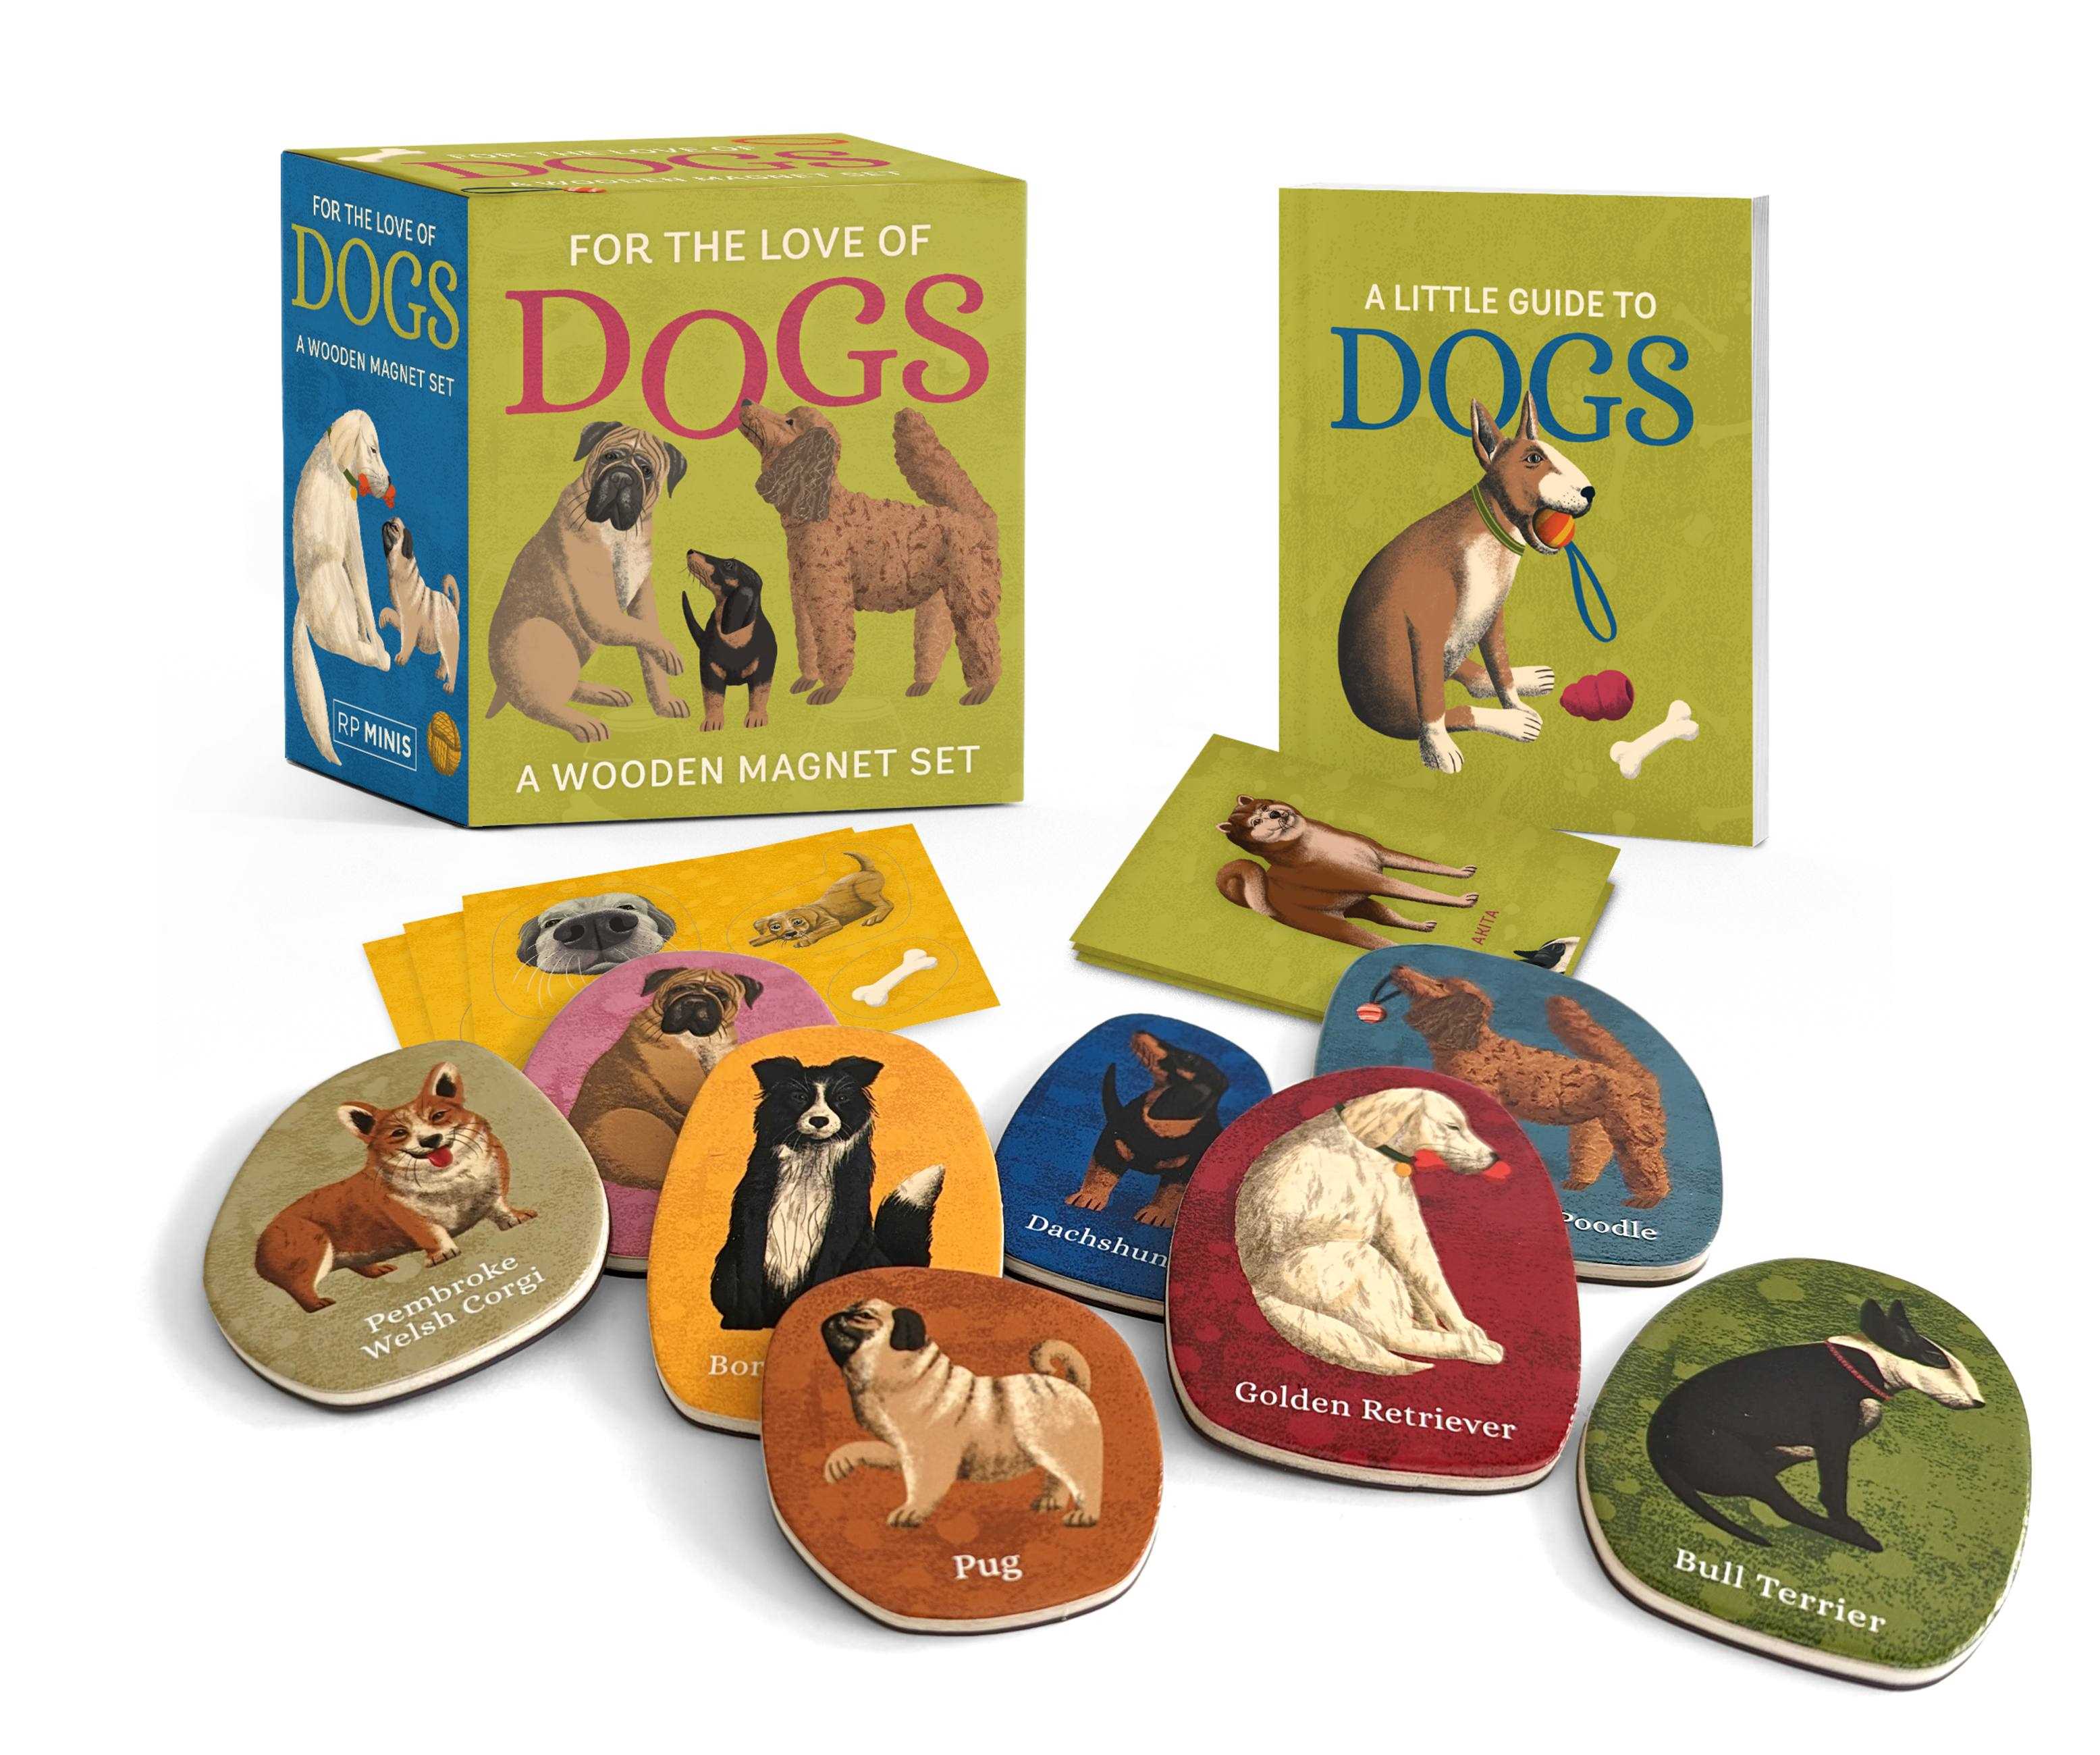 For the Love of Dogs (A Wooden Magnet Set)